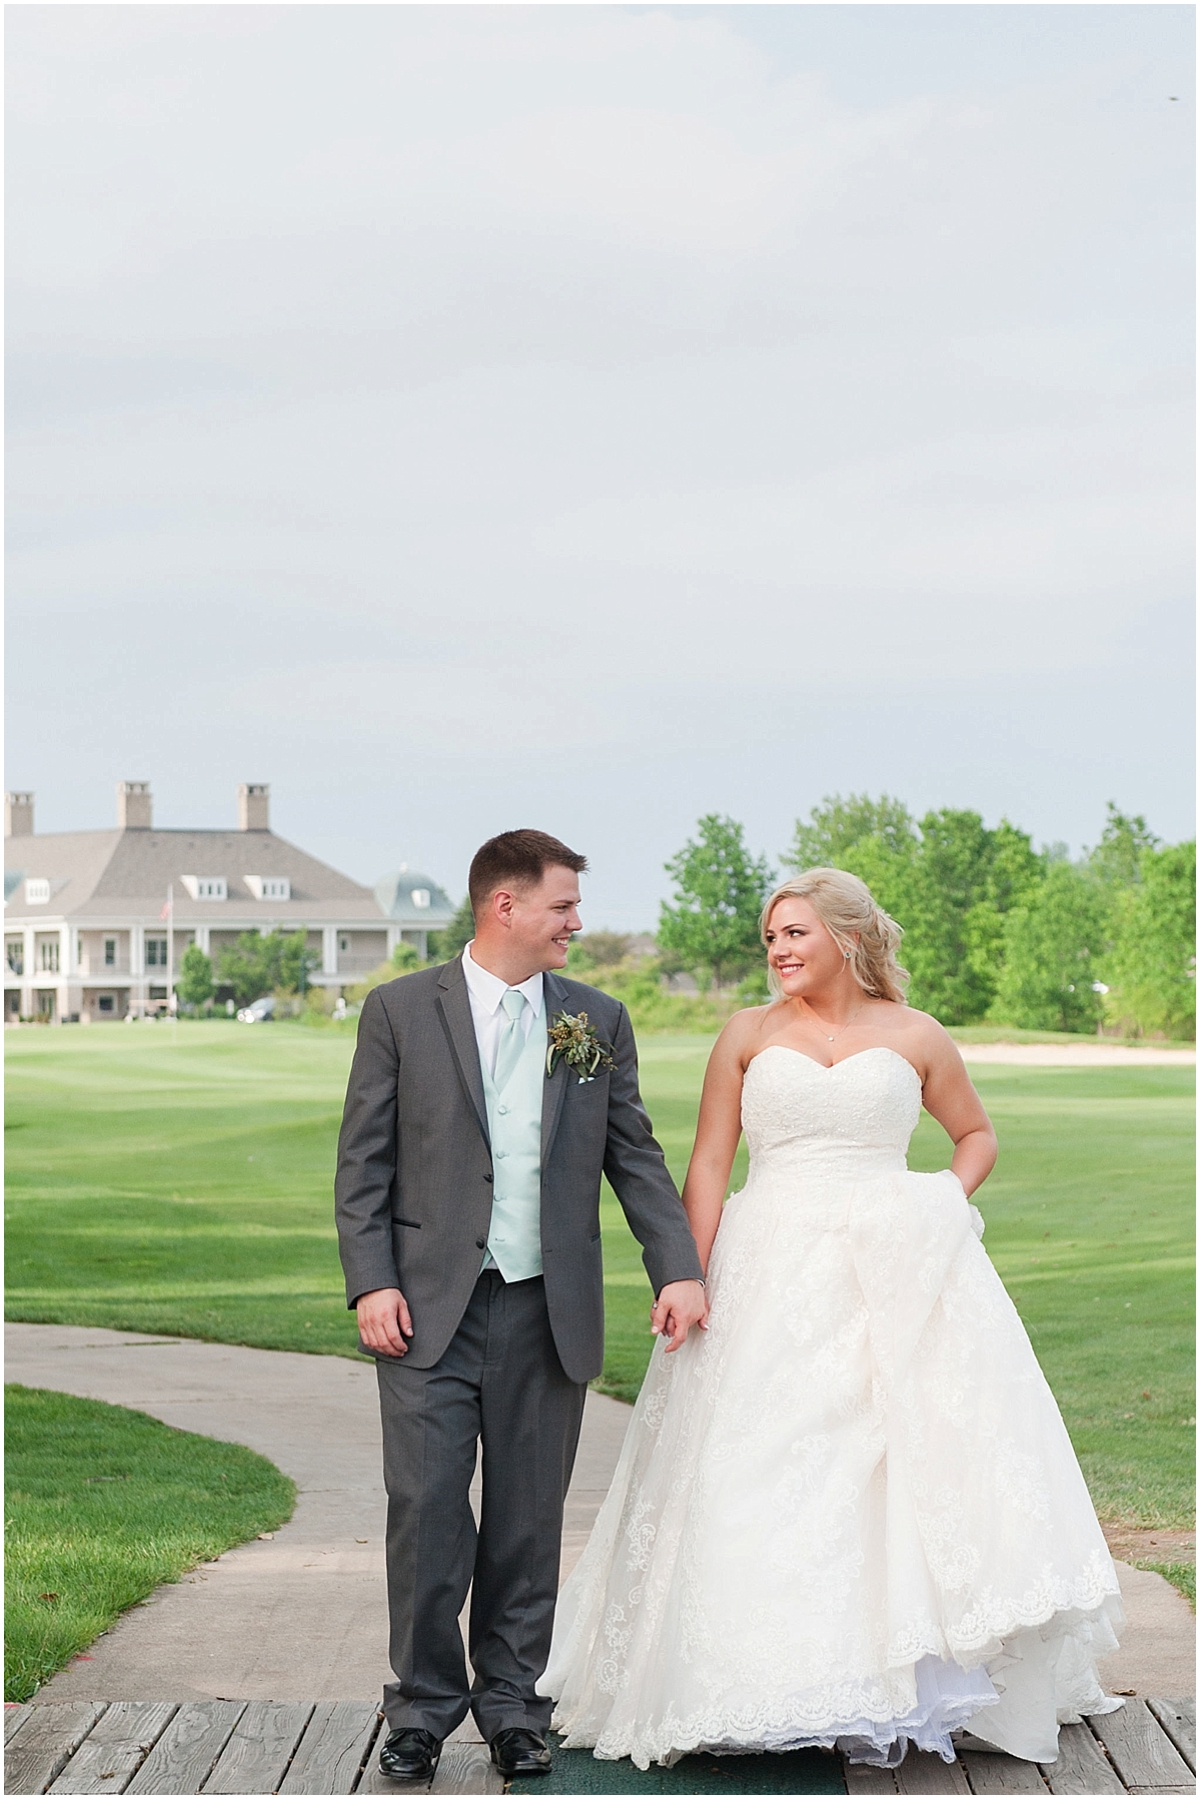 Heritage Golf Club Wedding Hilliard Ohio elegant wine inspired outdoor bride and groom portraits on a golf course Hilliard ohio wedding photographer pipers photography